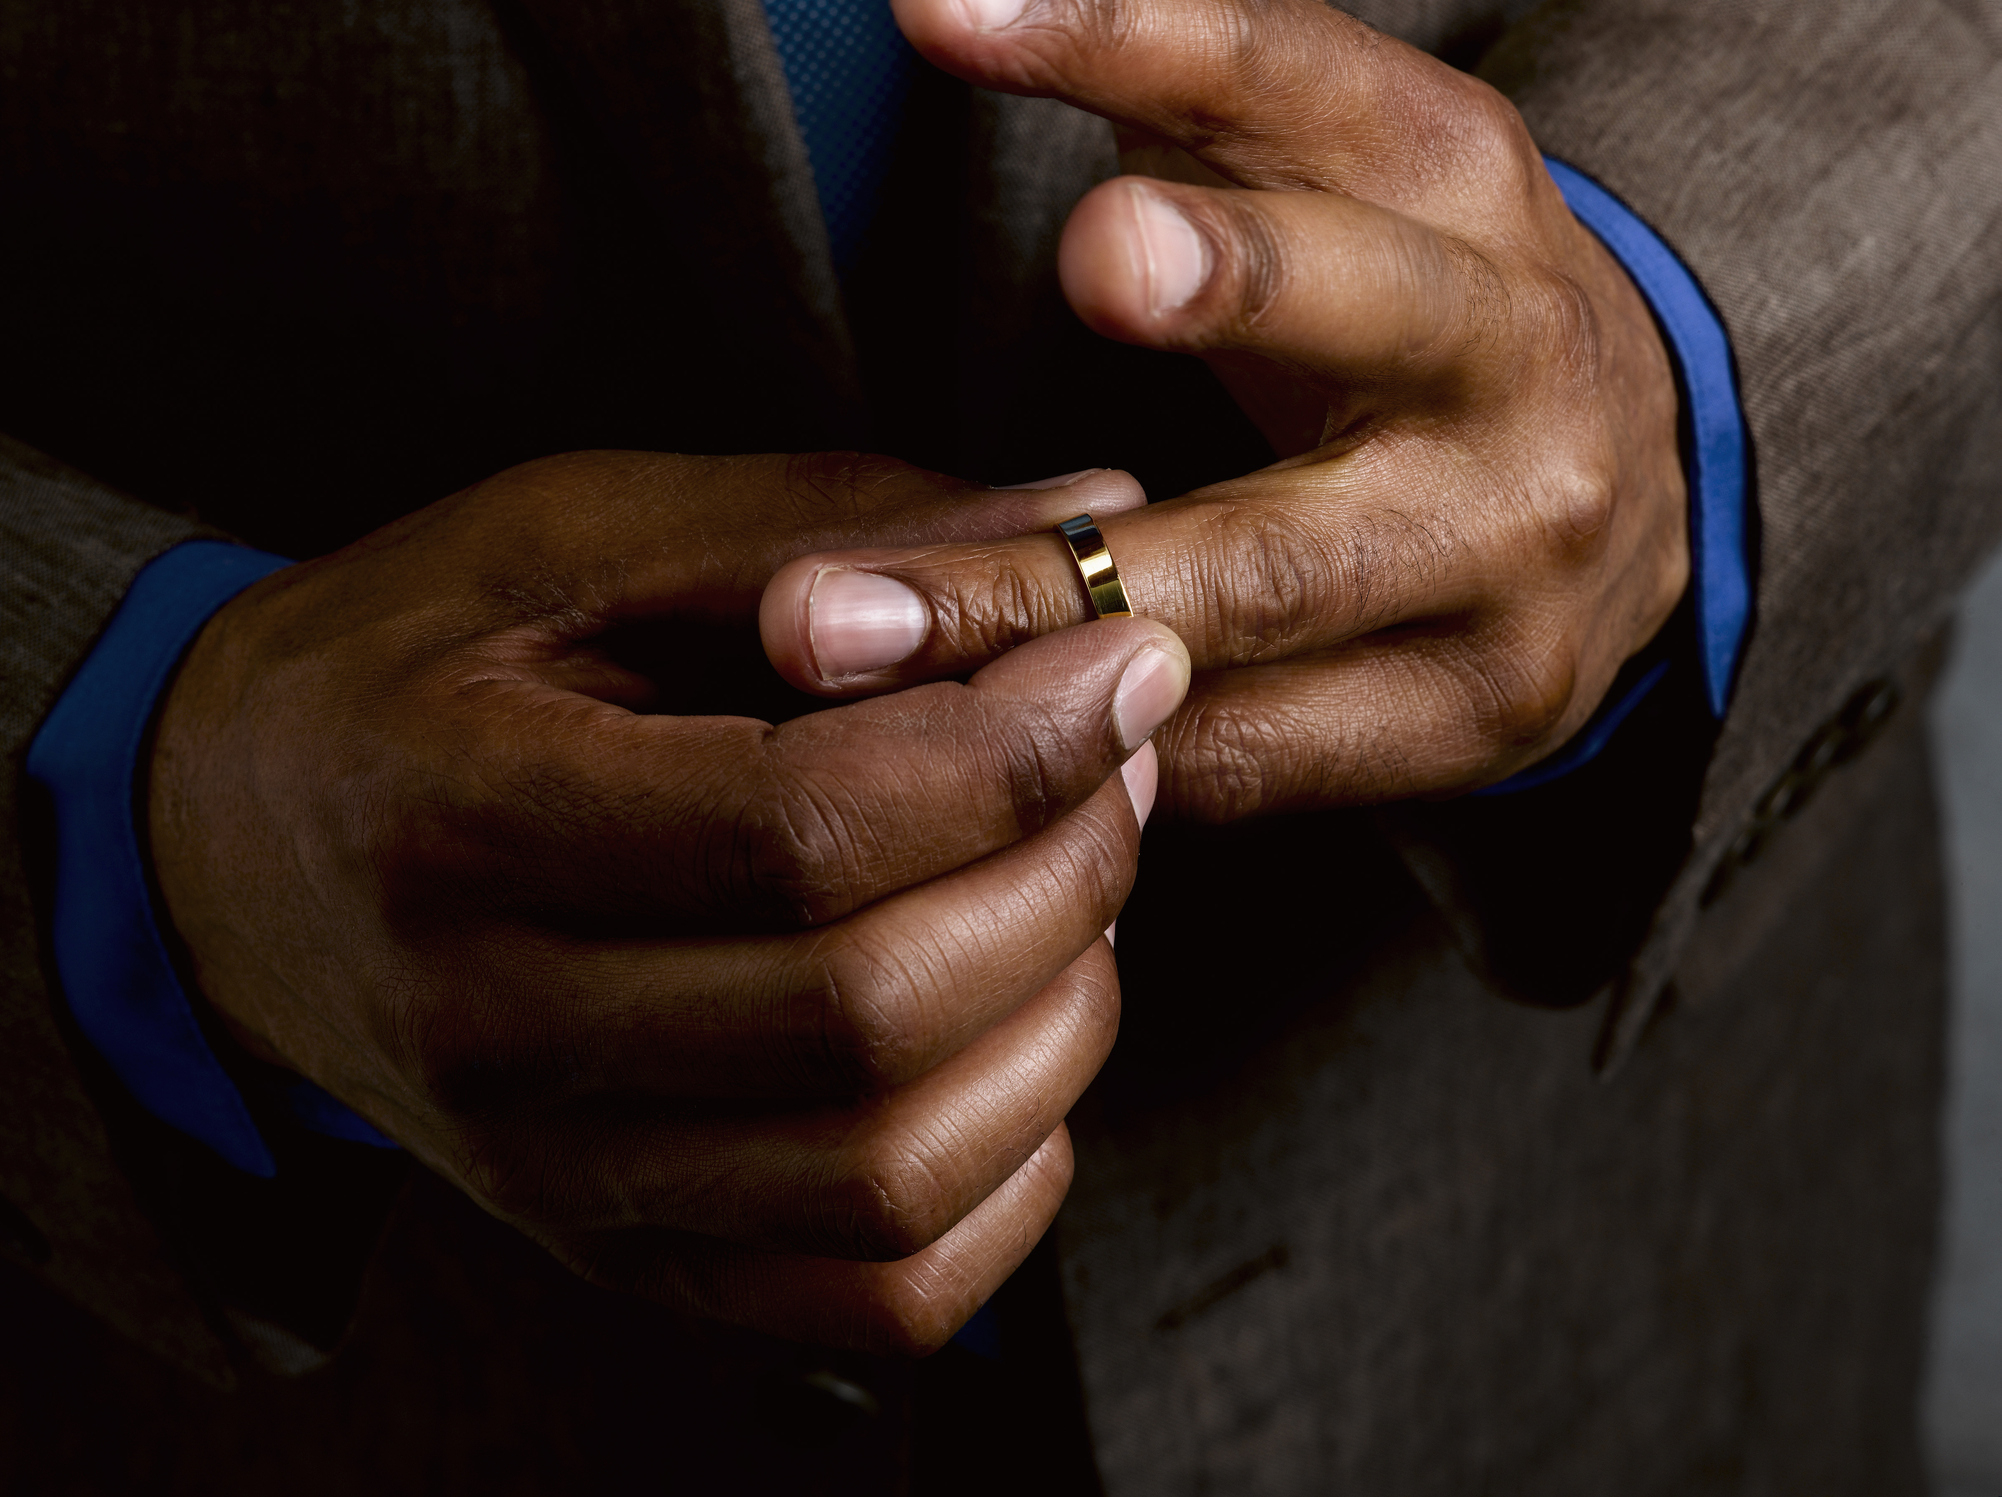 Person in a suit fiddling with wedding band on their finger